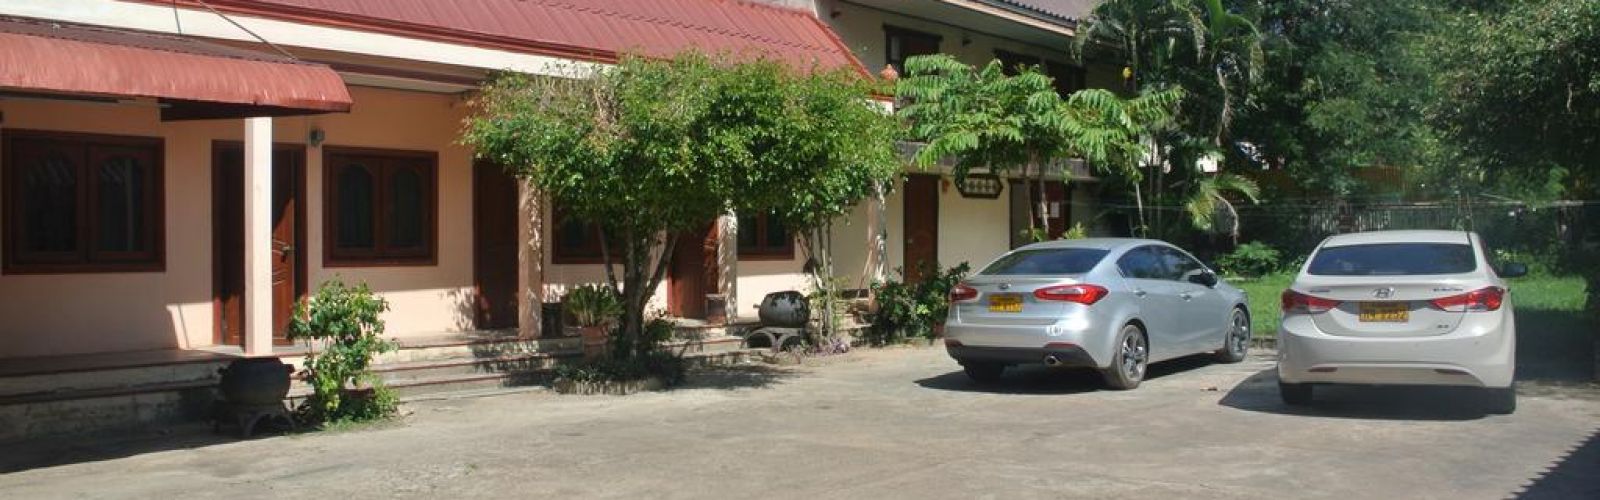 Mody Guesthouse